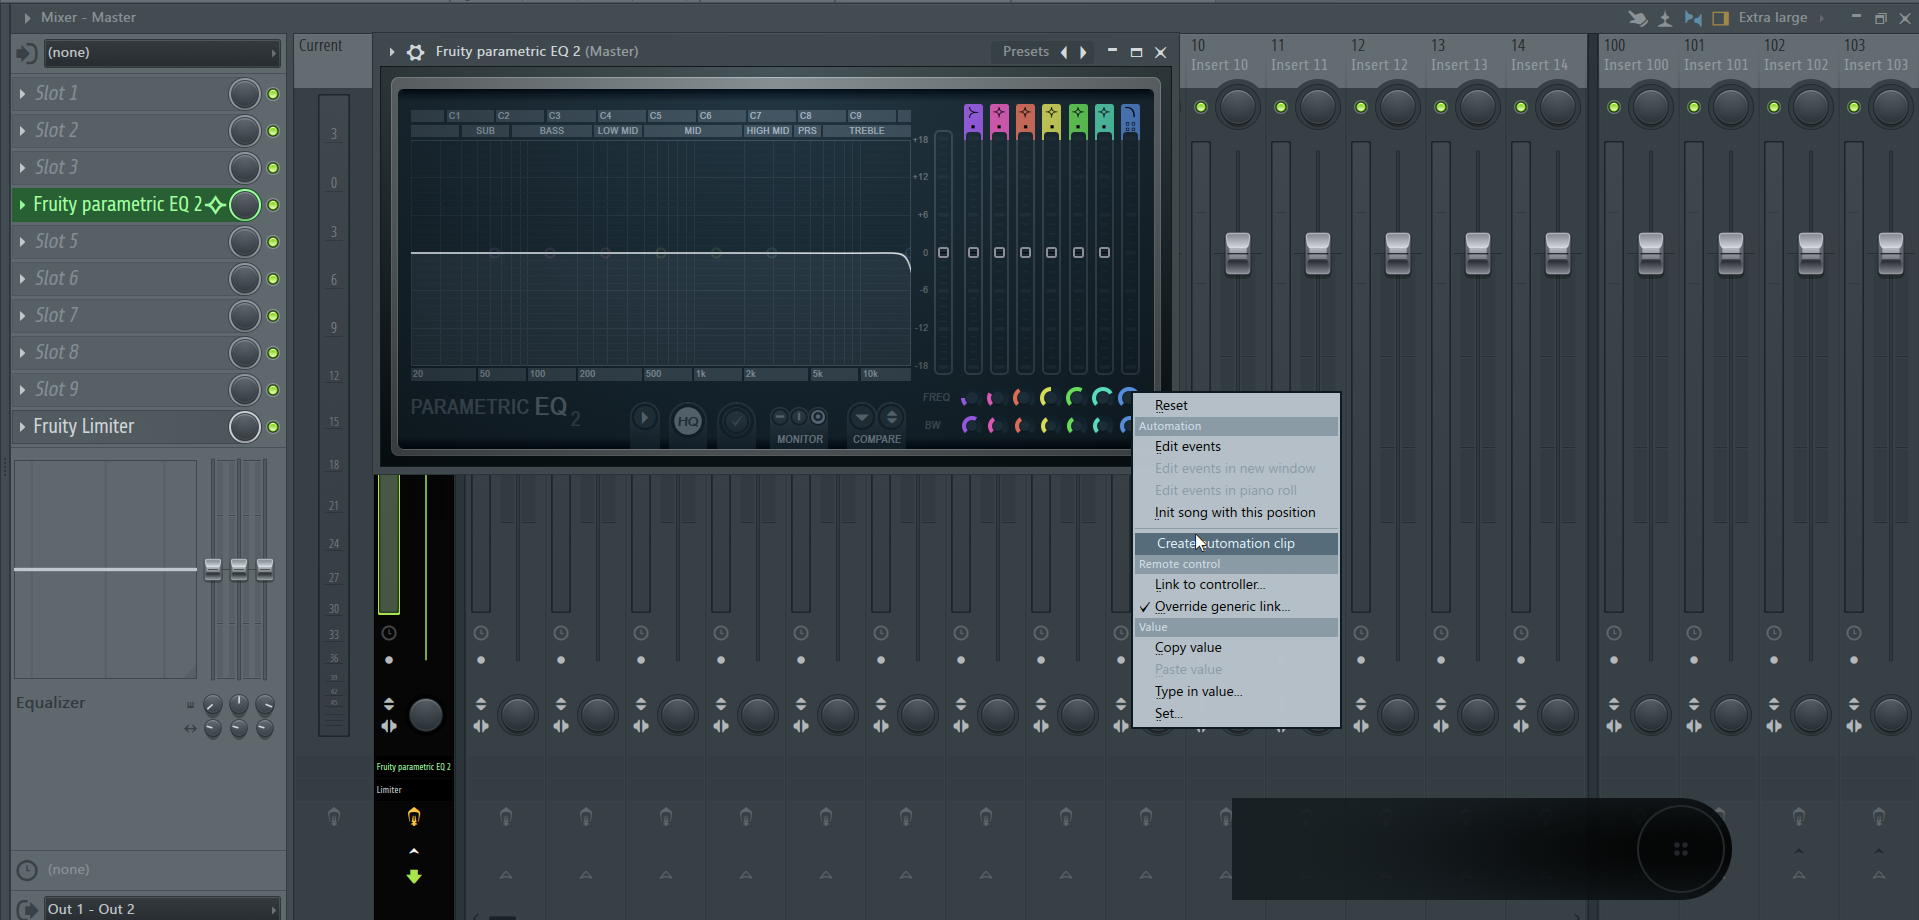 How to create an automation clip in Image-Line's FL Studio DAW - IMG2.png